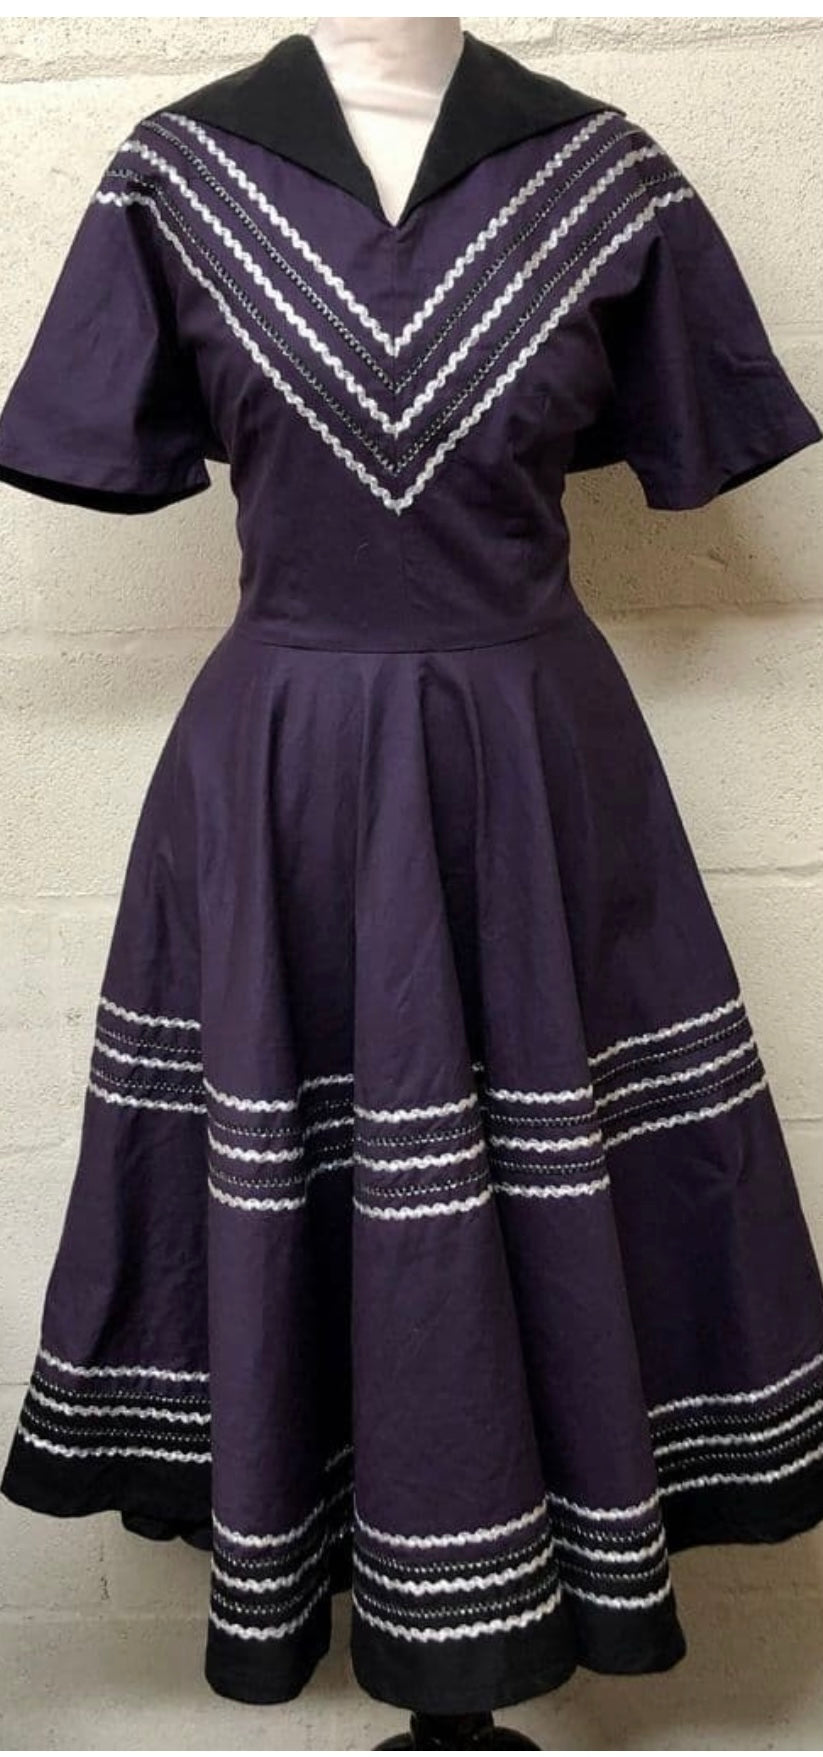 Patio dress vintage 1950s style Mexican full circle purple M only